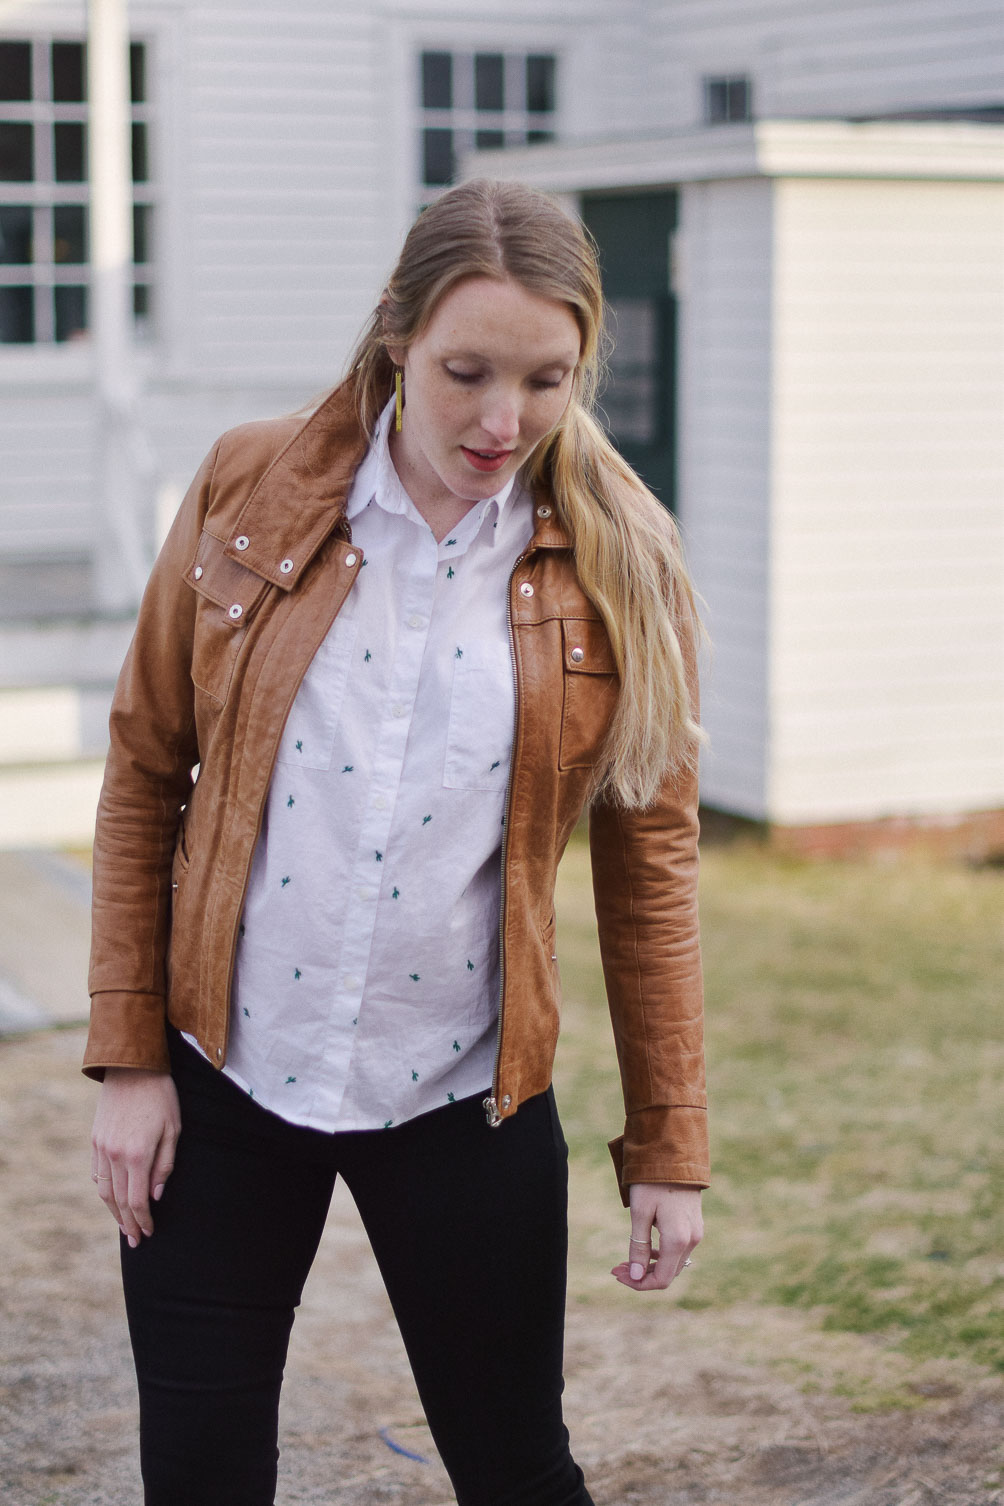 styling easy maternity outfit with cactus print top, skinny jeans, and tan leather jacket